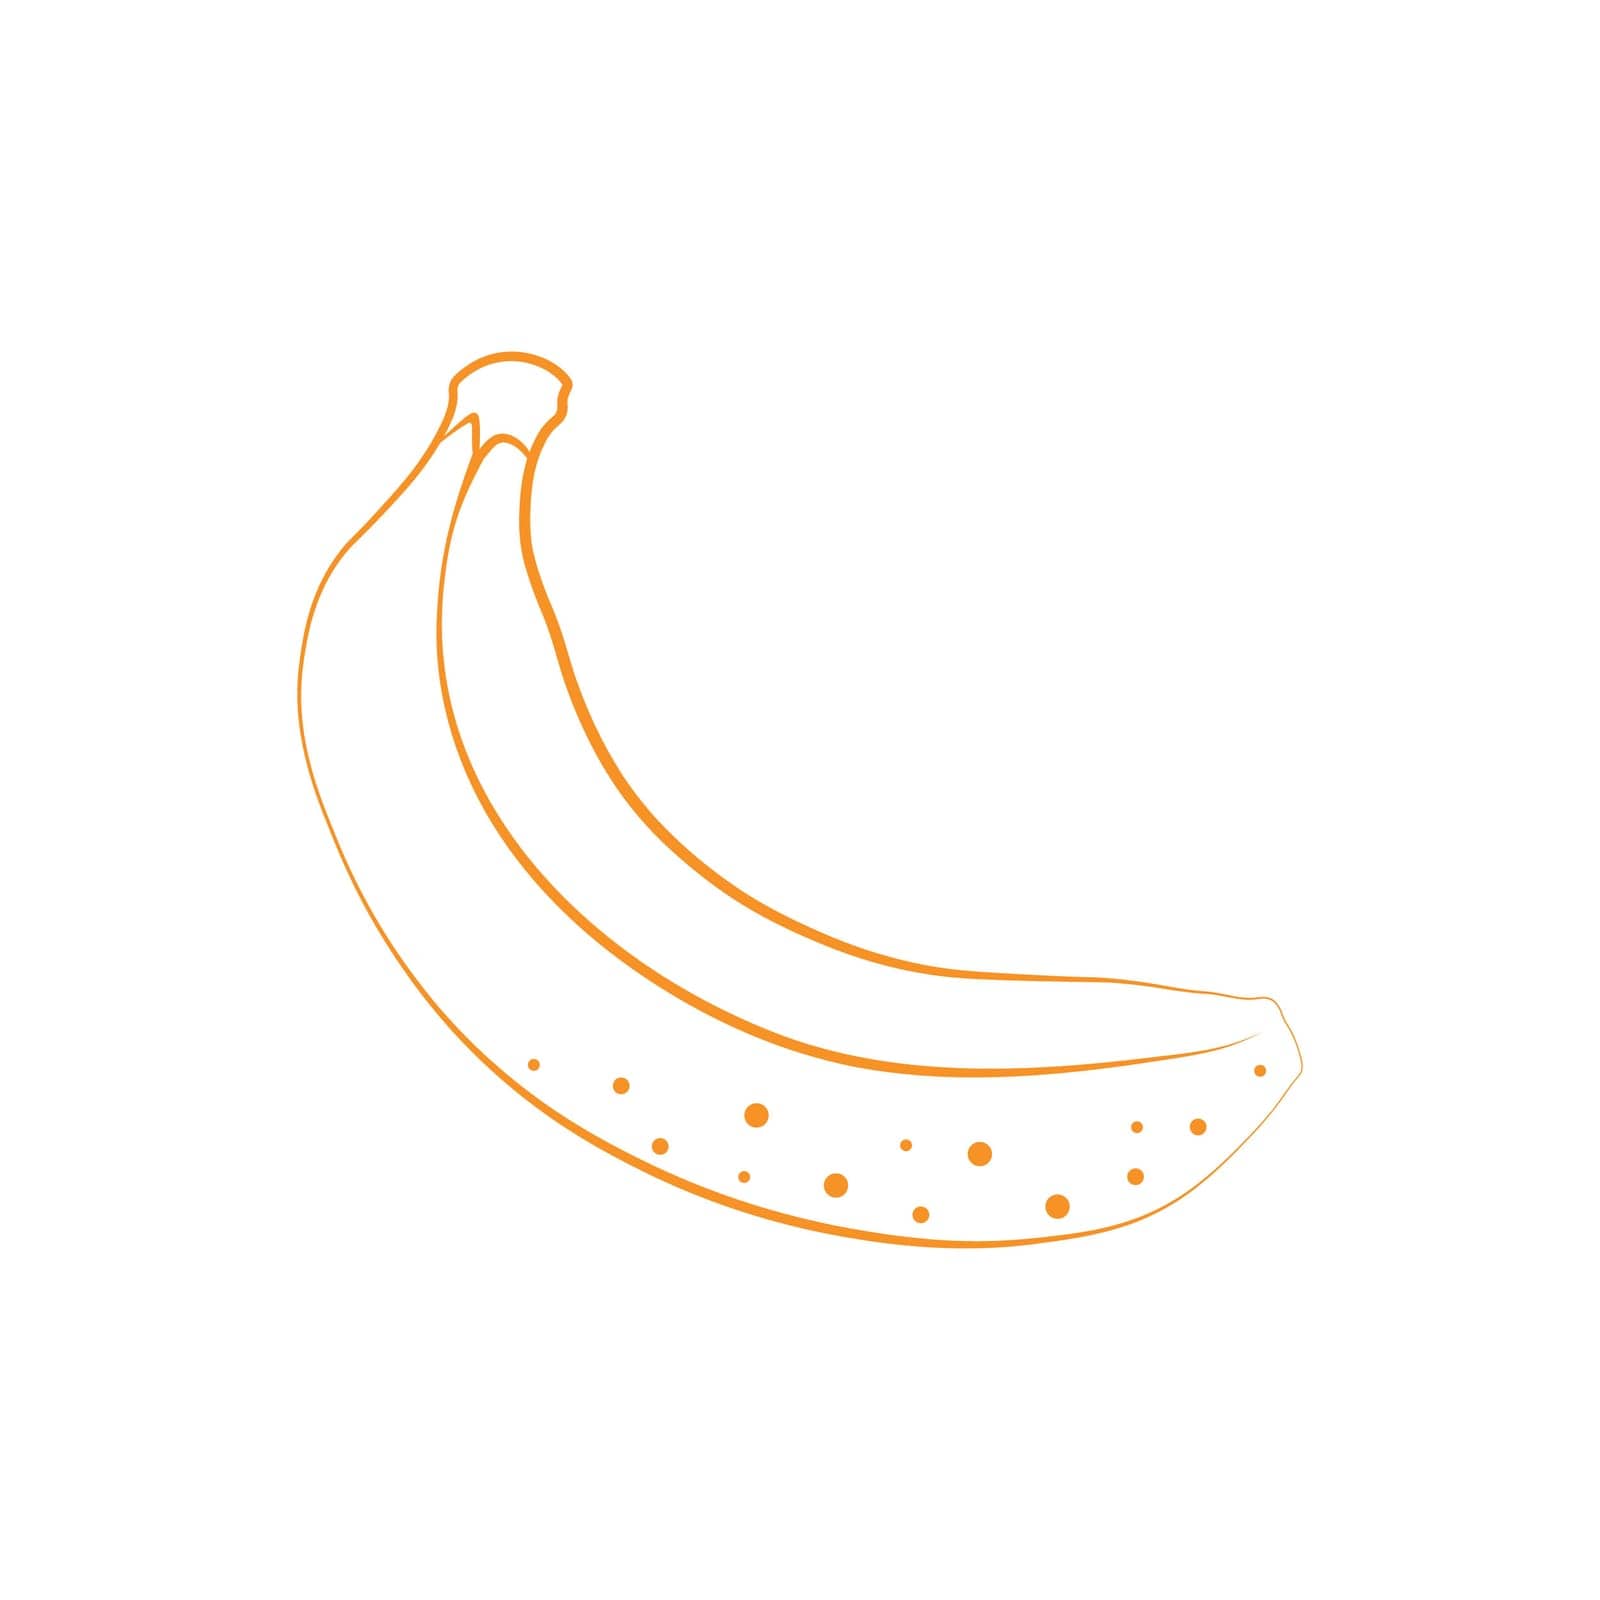 Banana coloring book. The image of a banana in the form of a children s coloring book. A tropical fruit. Vector illustration isolated on a white background.